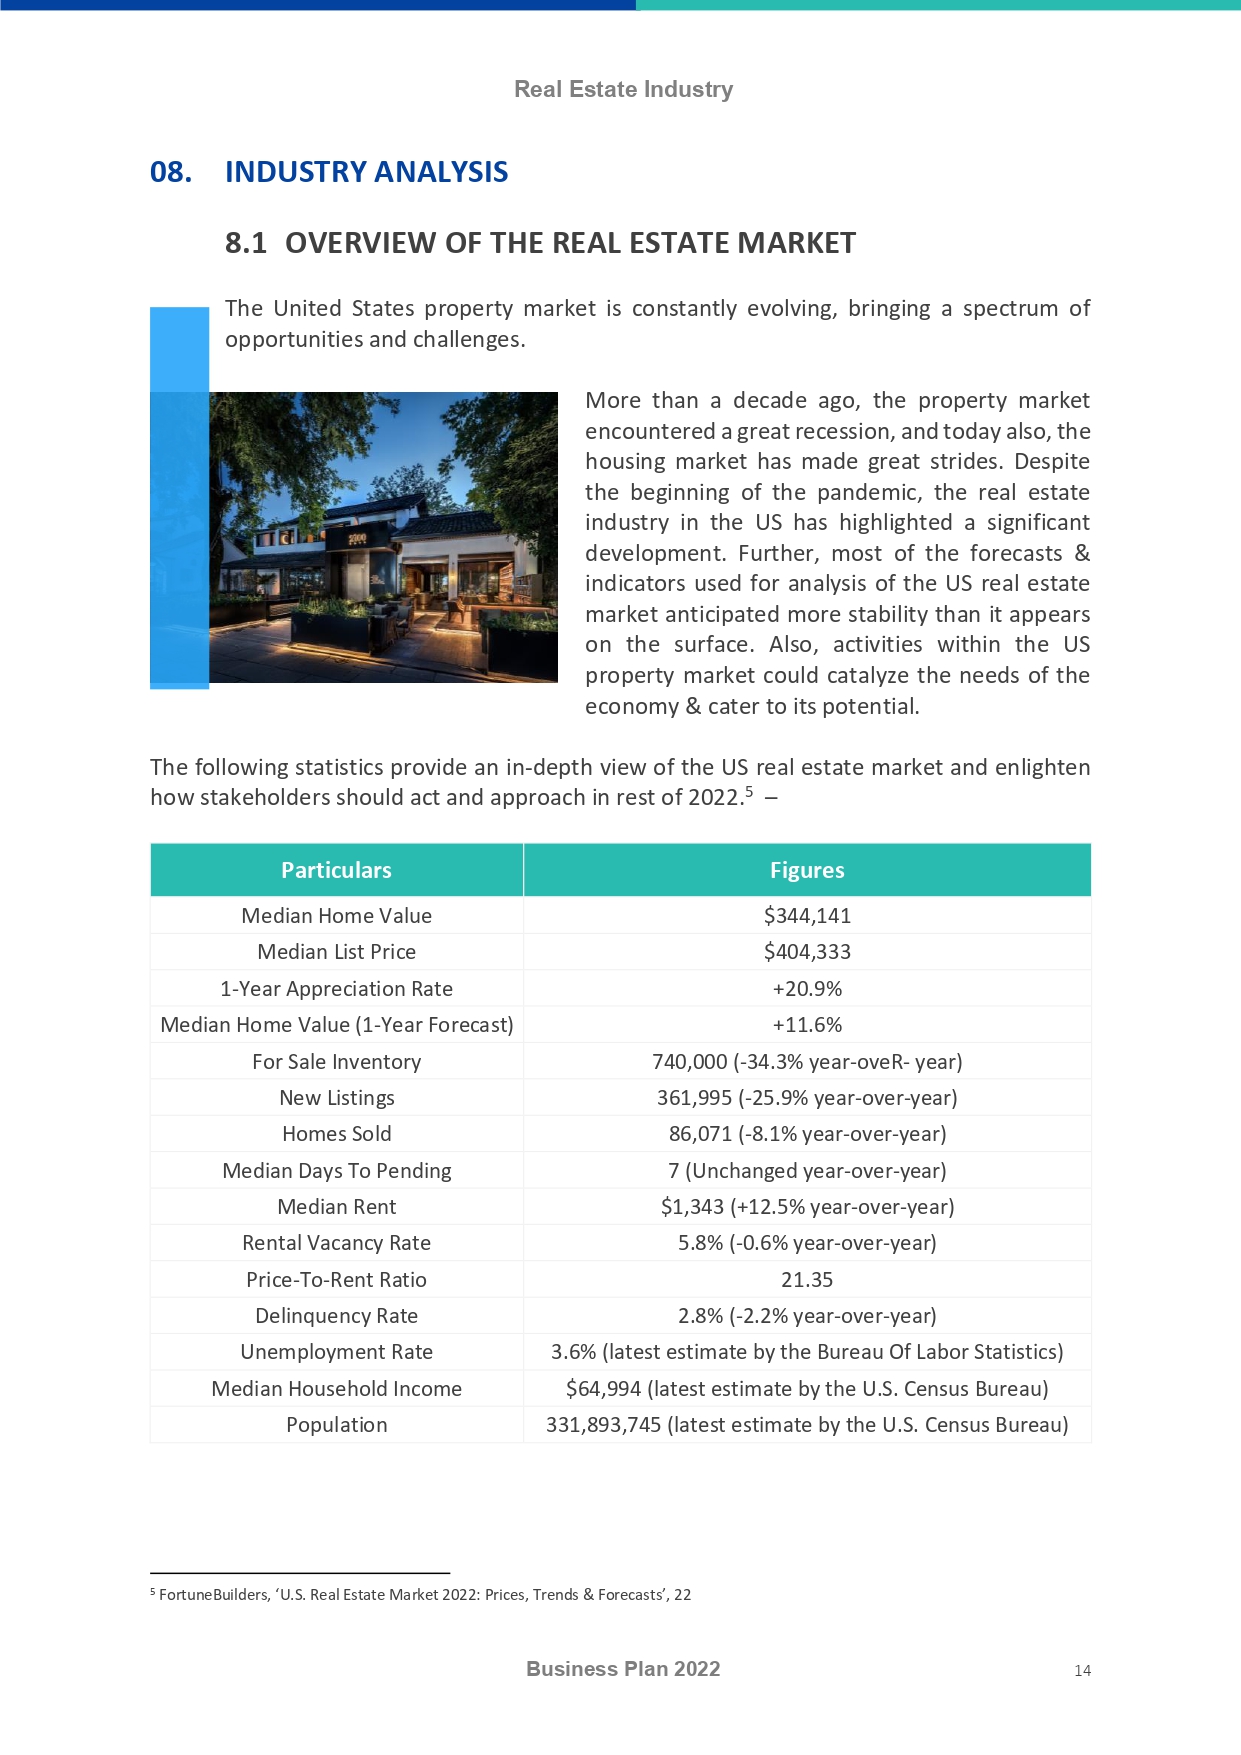 Real Estate Industry Business Plan Word Document